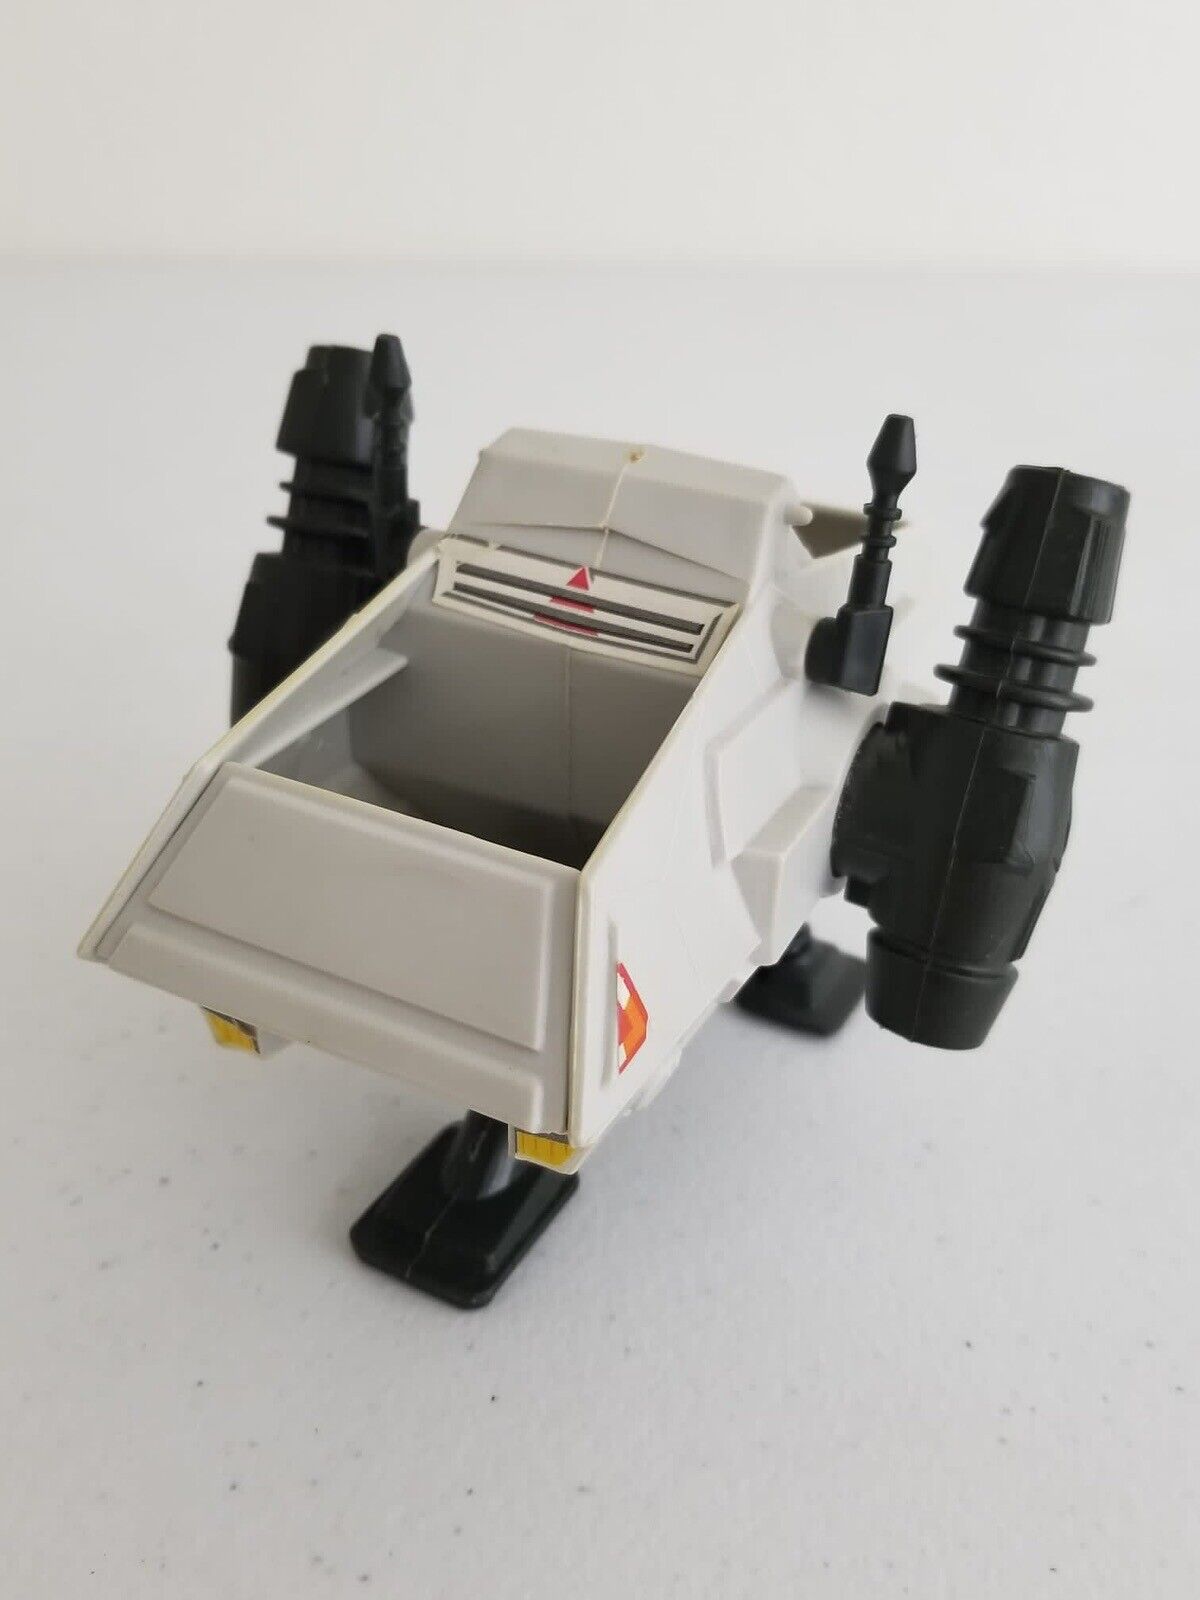 1980 Star Wars Personal Deployment Transport by Hasbro - Vintage Collectible Toy - TreasuTiques